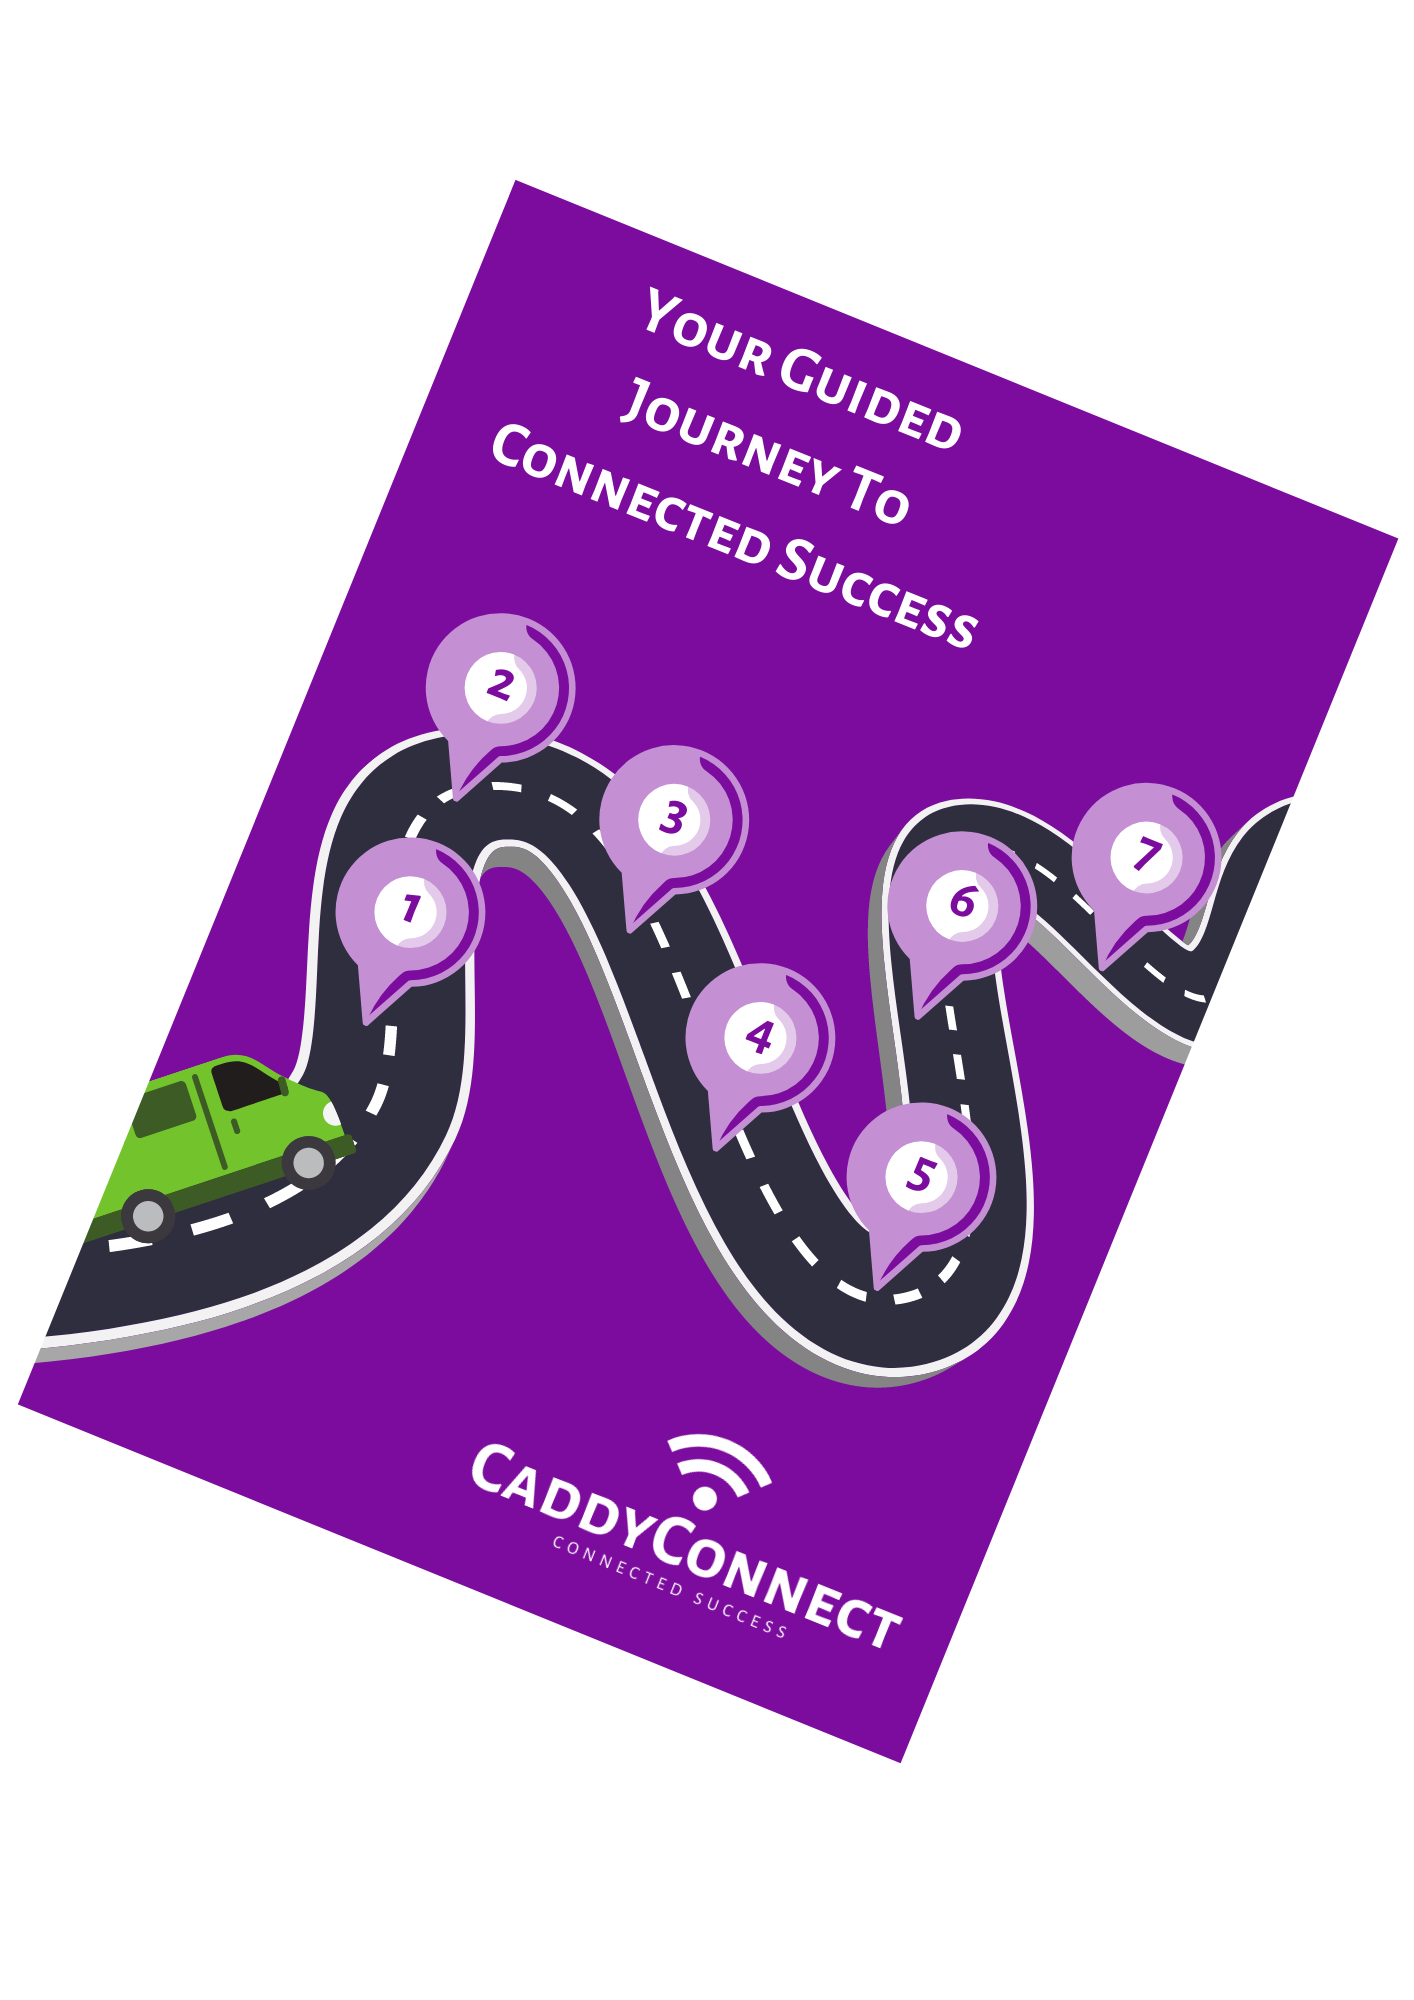 Download Your Guided Journey to Connected Success